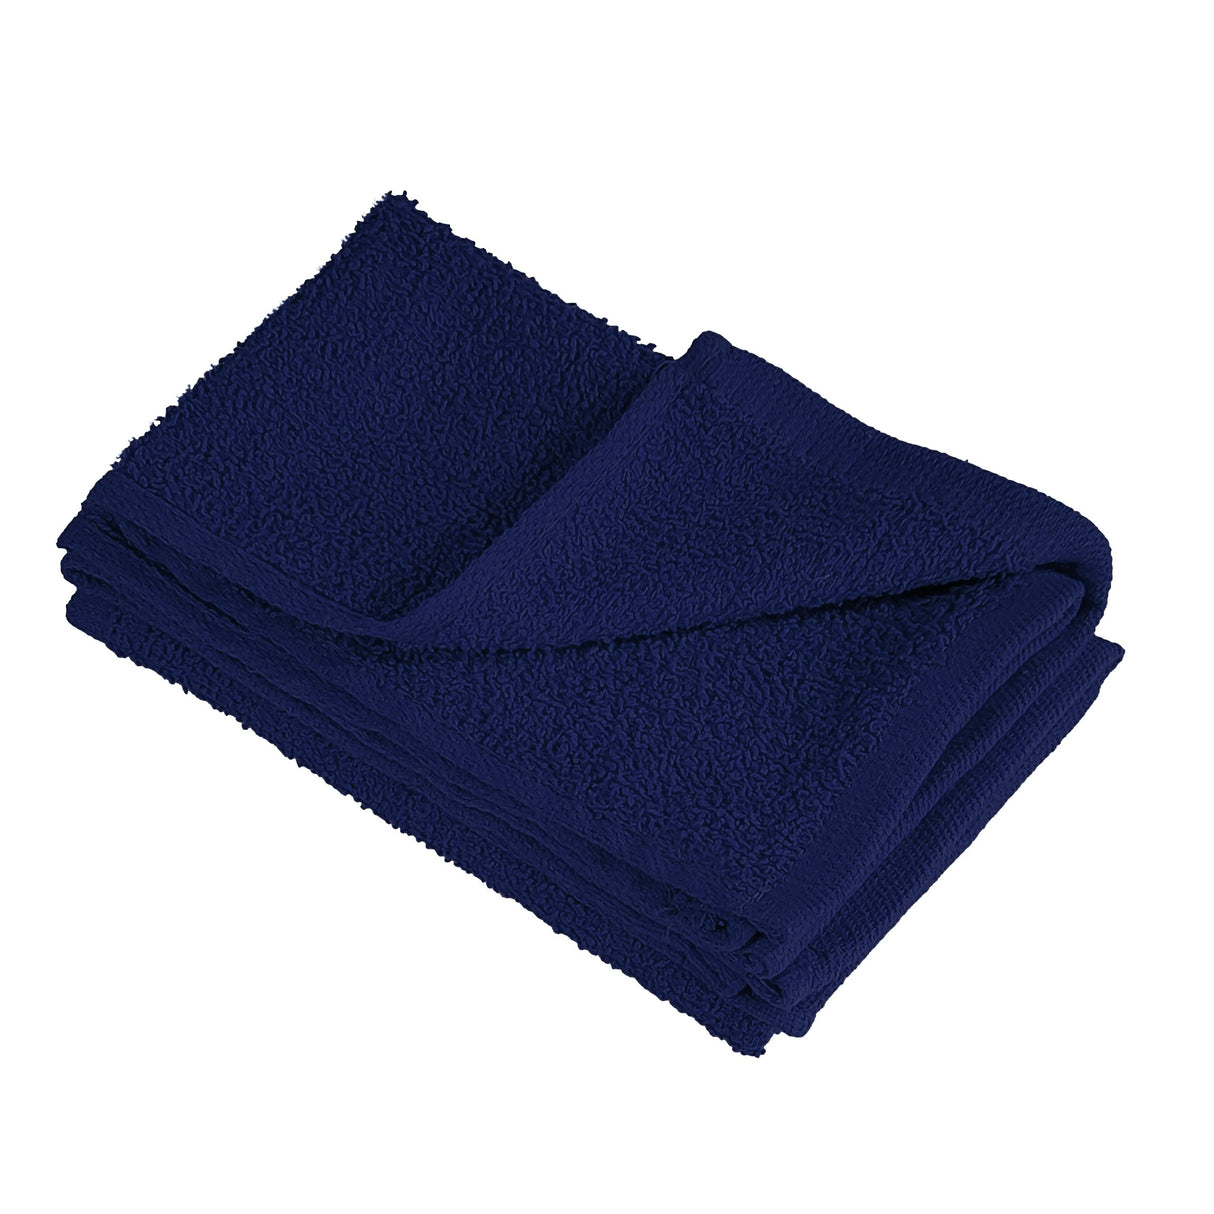 Promotional Rally Towel Navy